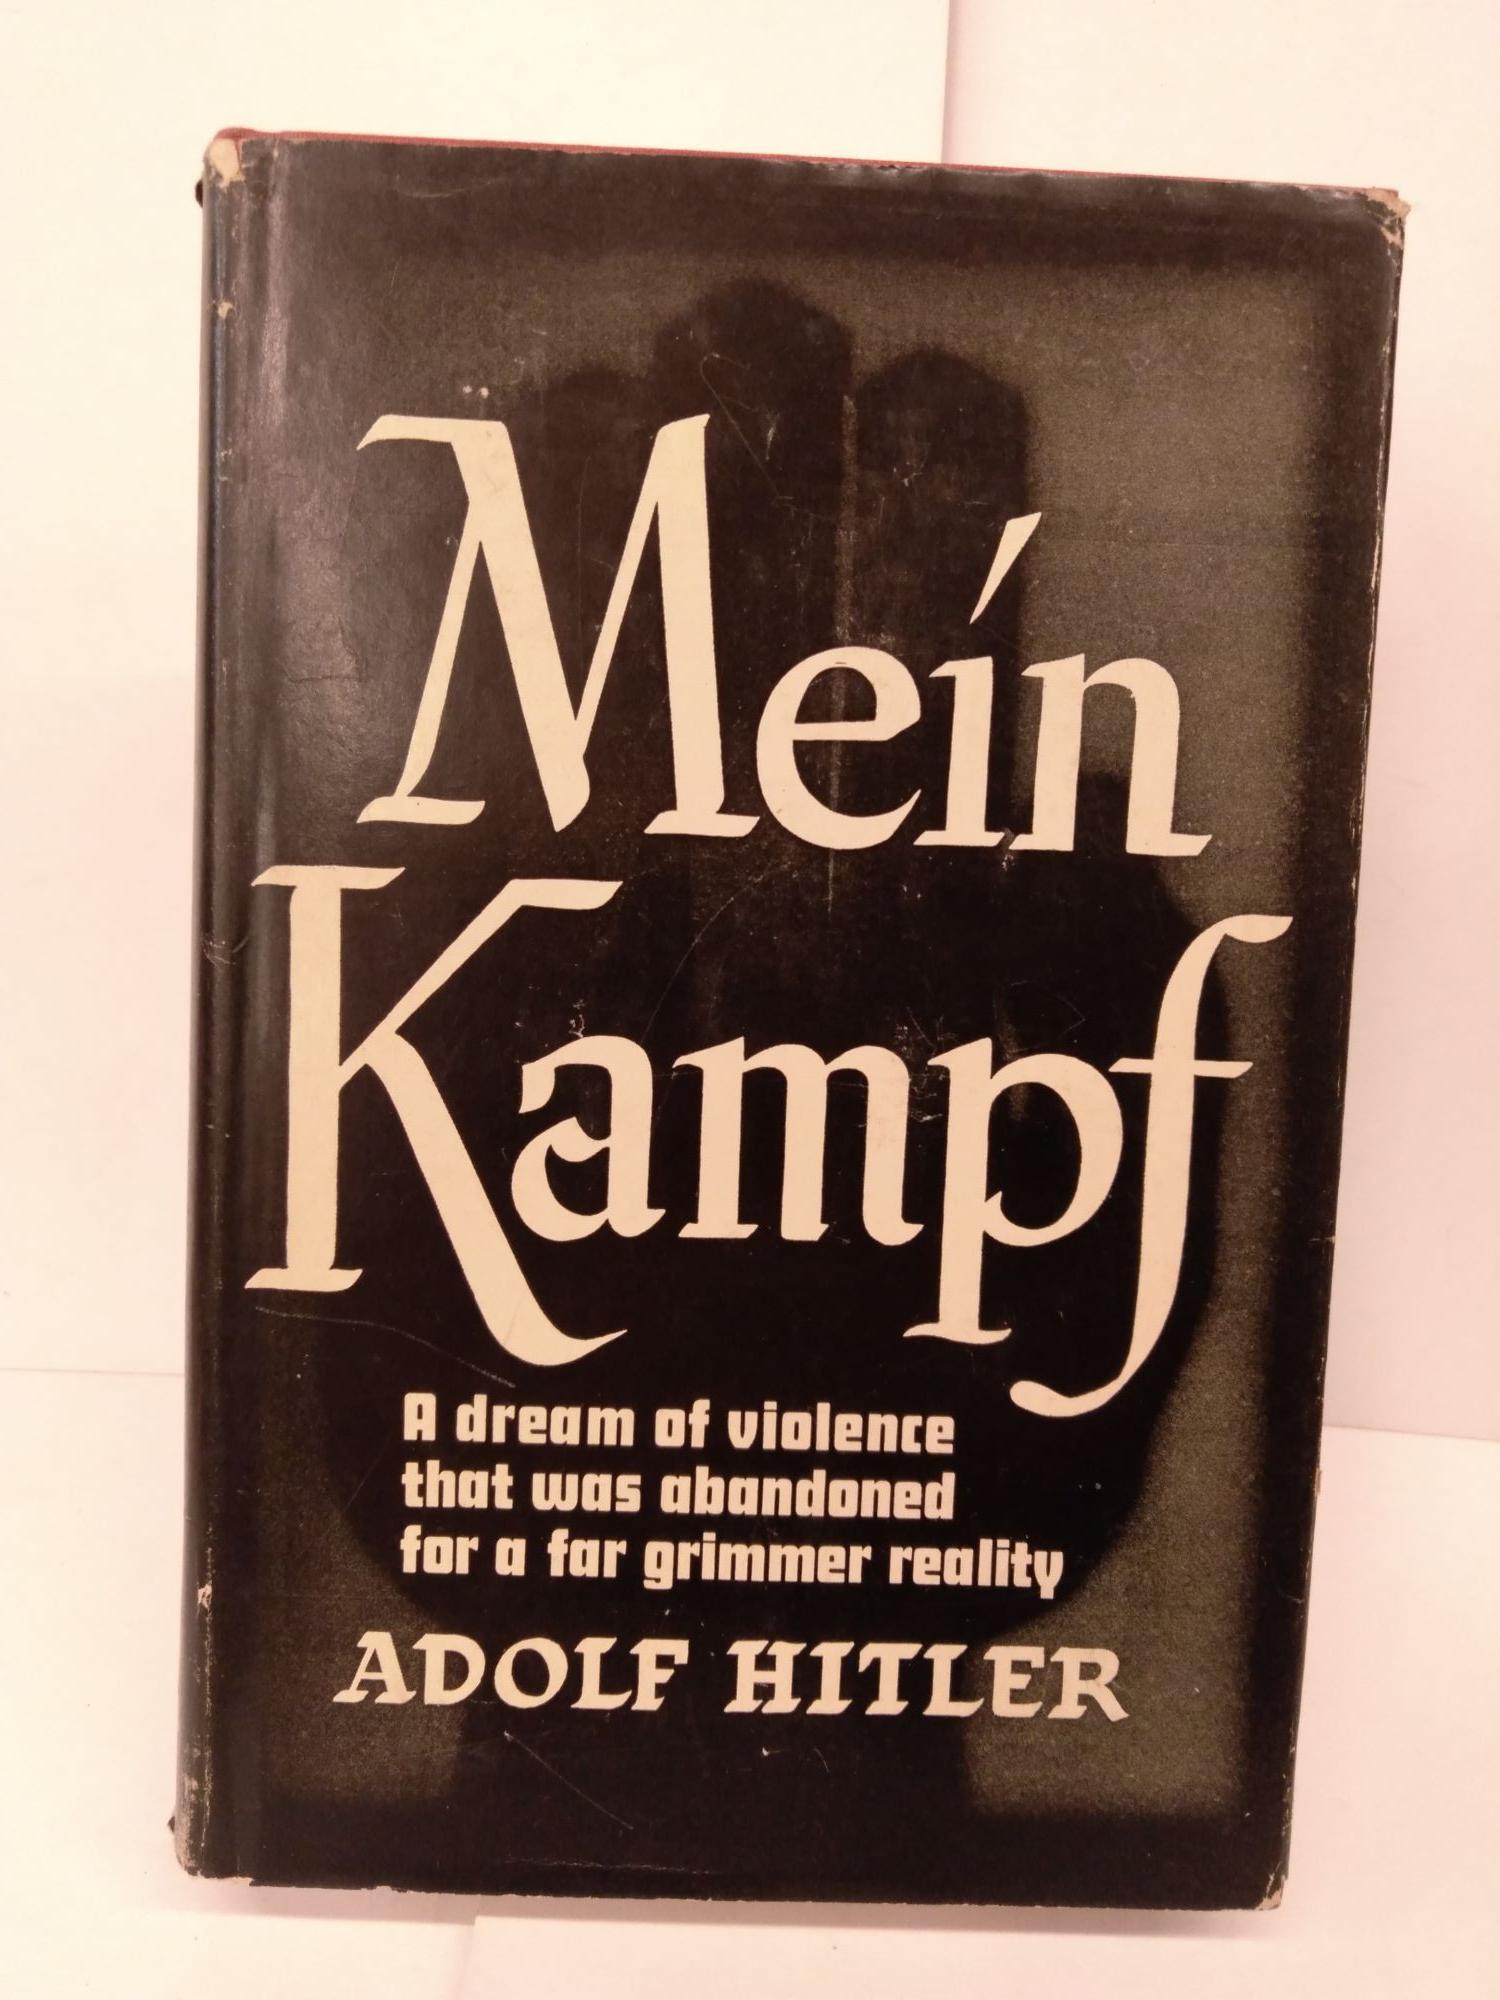 Simply Be website replaces picture of bra with one of Hitler's Mein Kampf